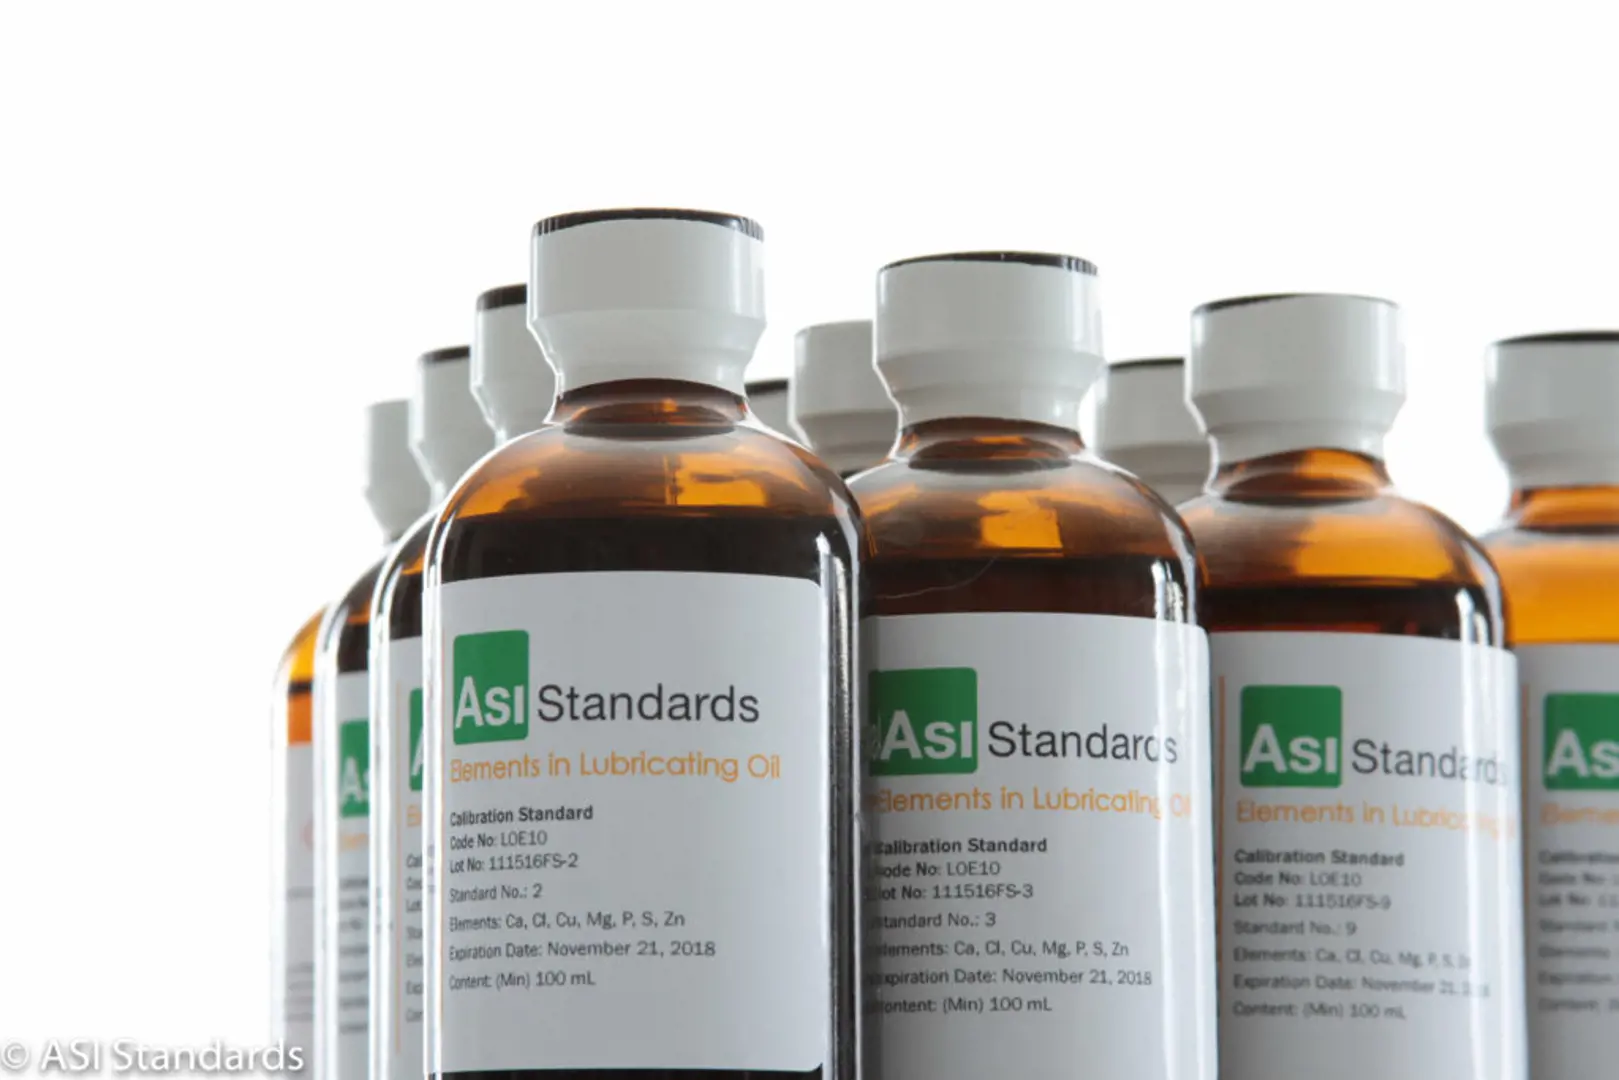 bottles containing element in oil reference standards from ASI Standards